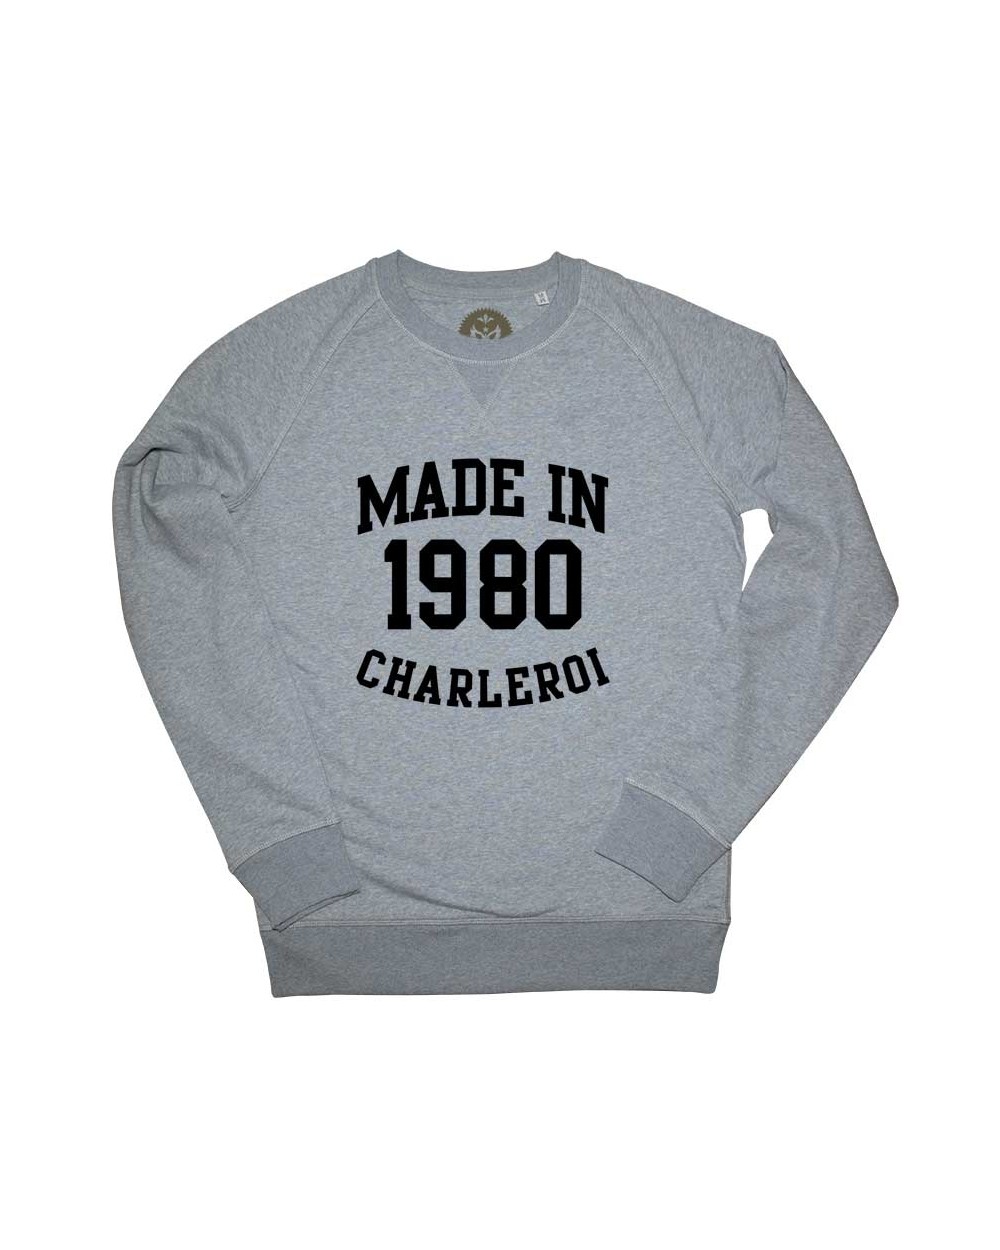 Made in Charleroi Perso Sweat